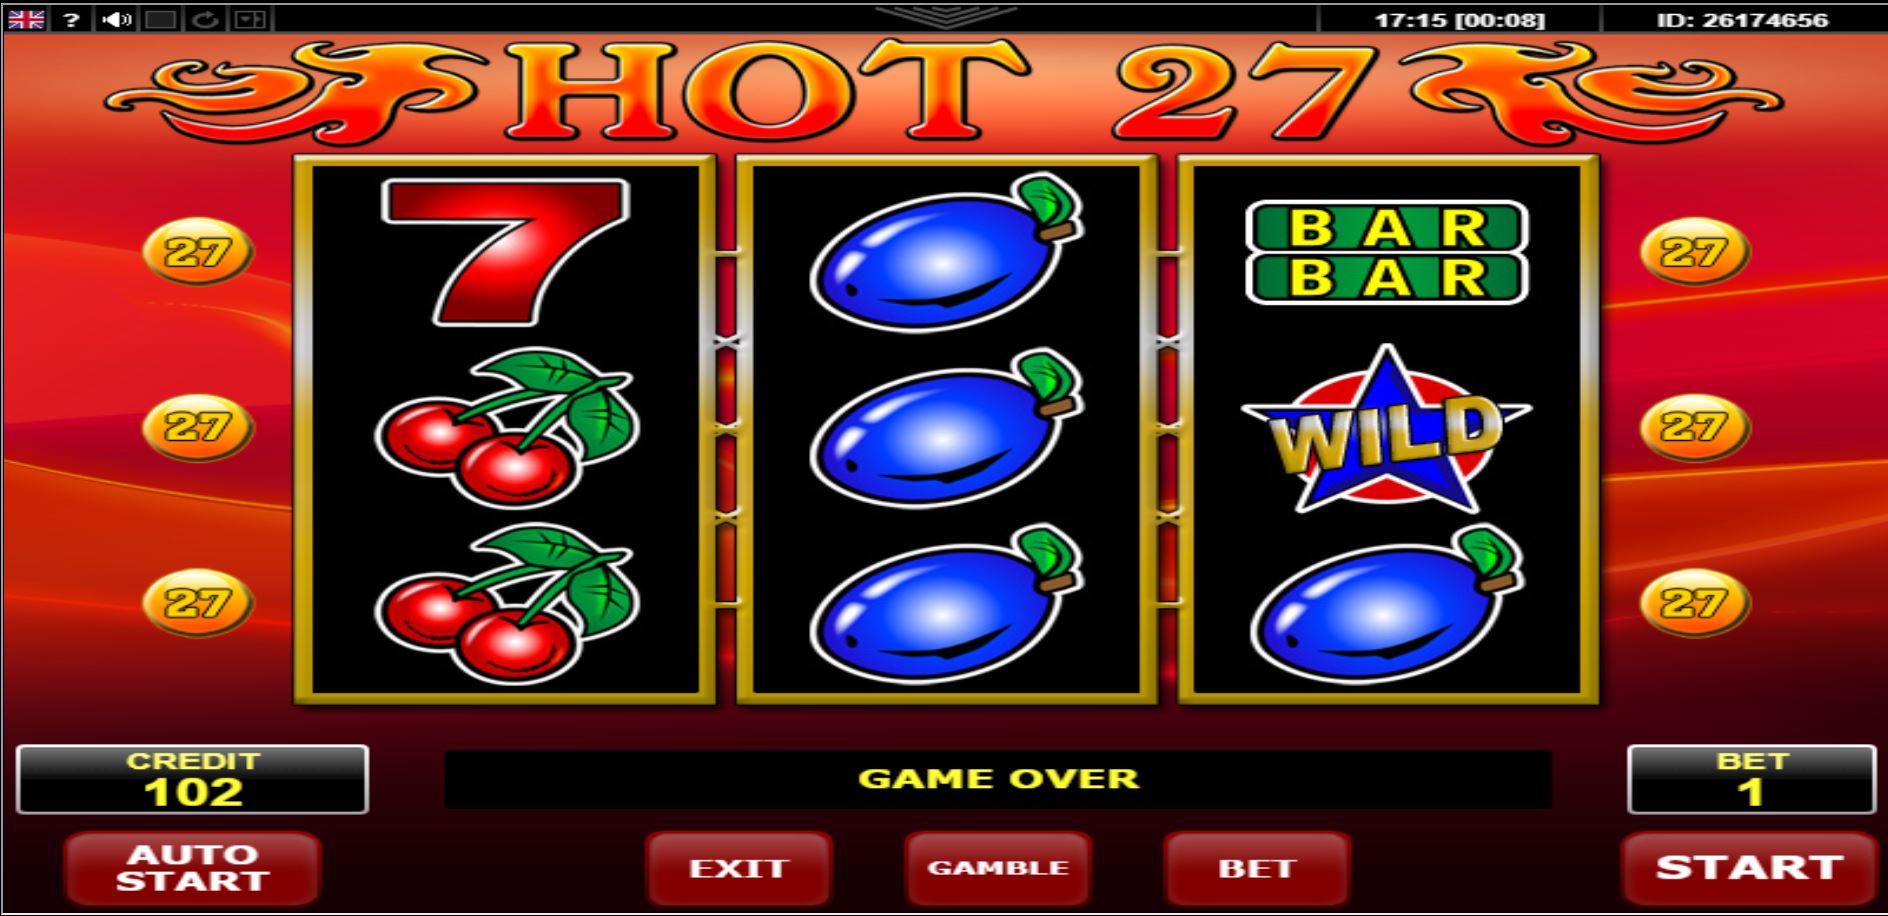 Types of online slot machines (2021 update) | SoftGamings